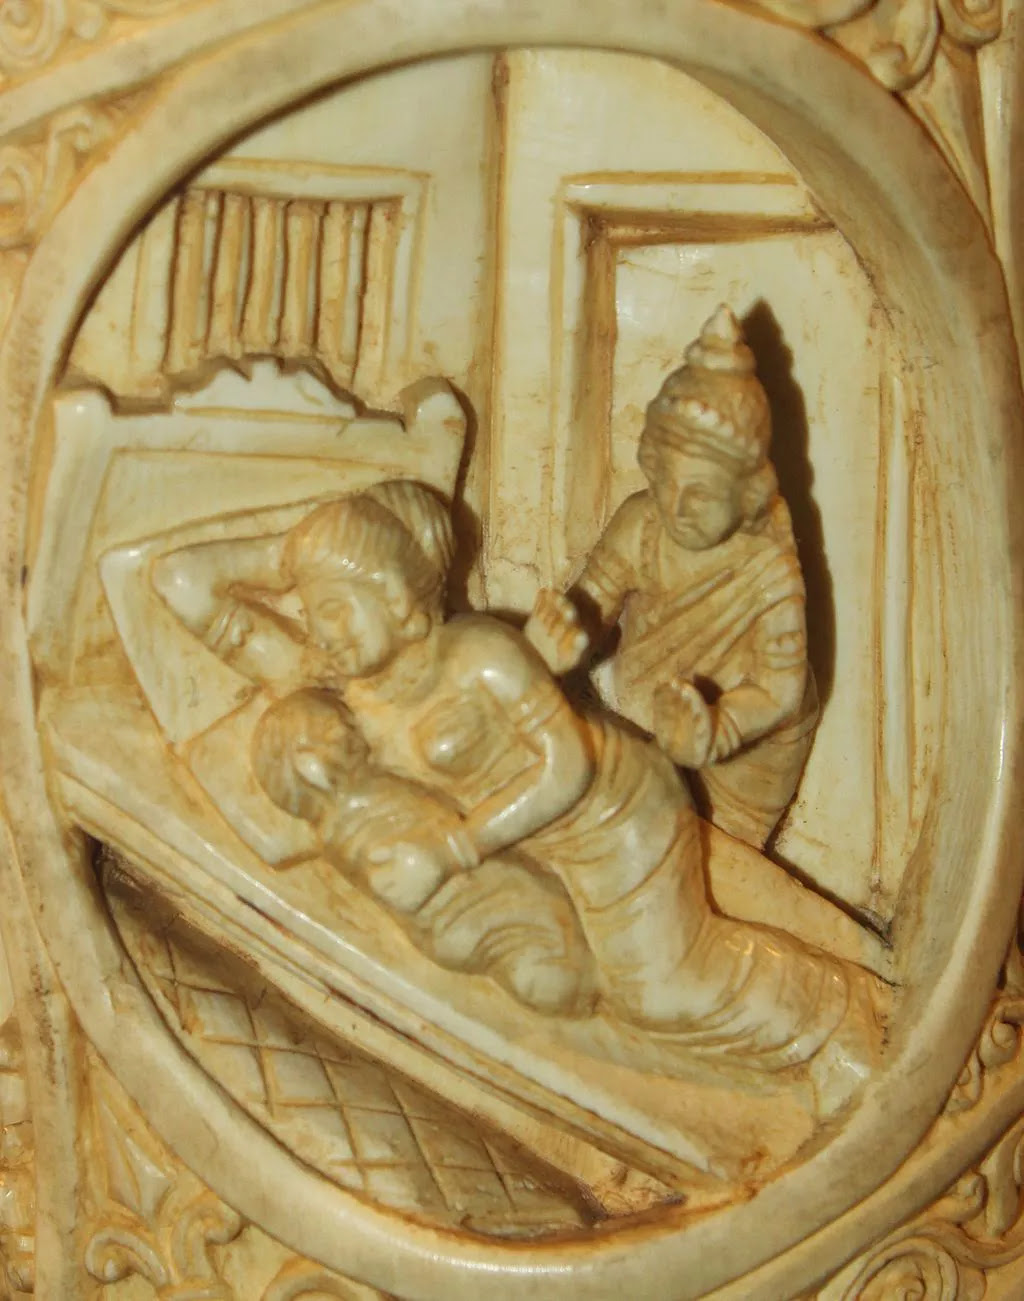 Ivory carving of Buddha leaving a woman and child sleeping in bed.